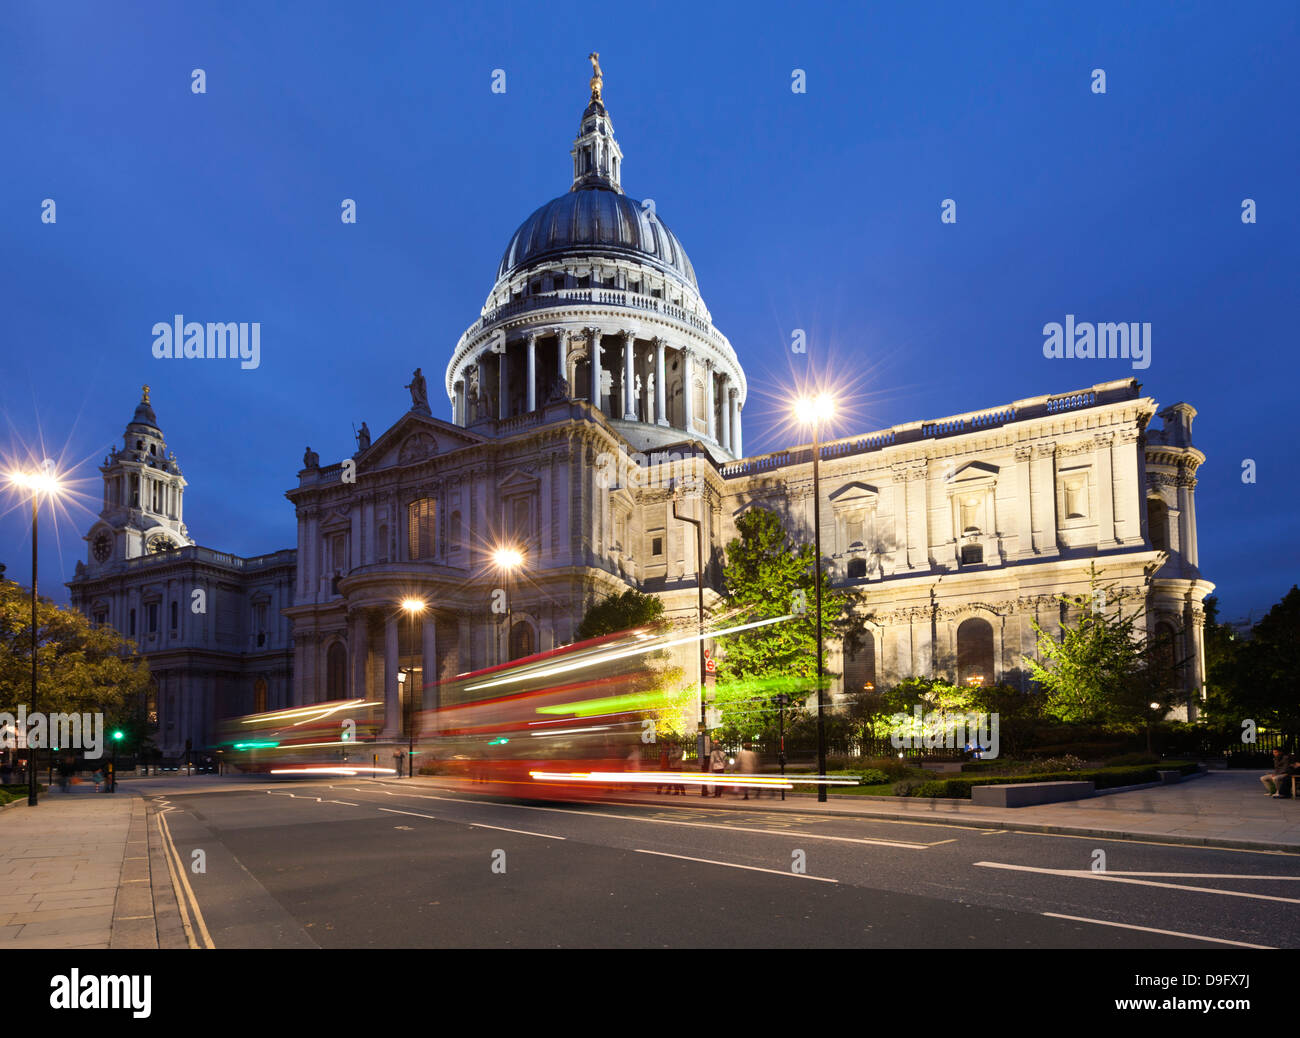 St. Paul's Cathedral at night, London, England, UK Stock Photo